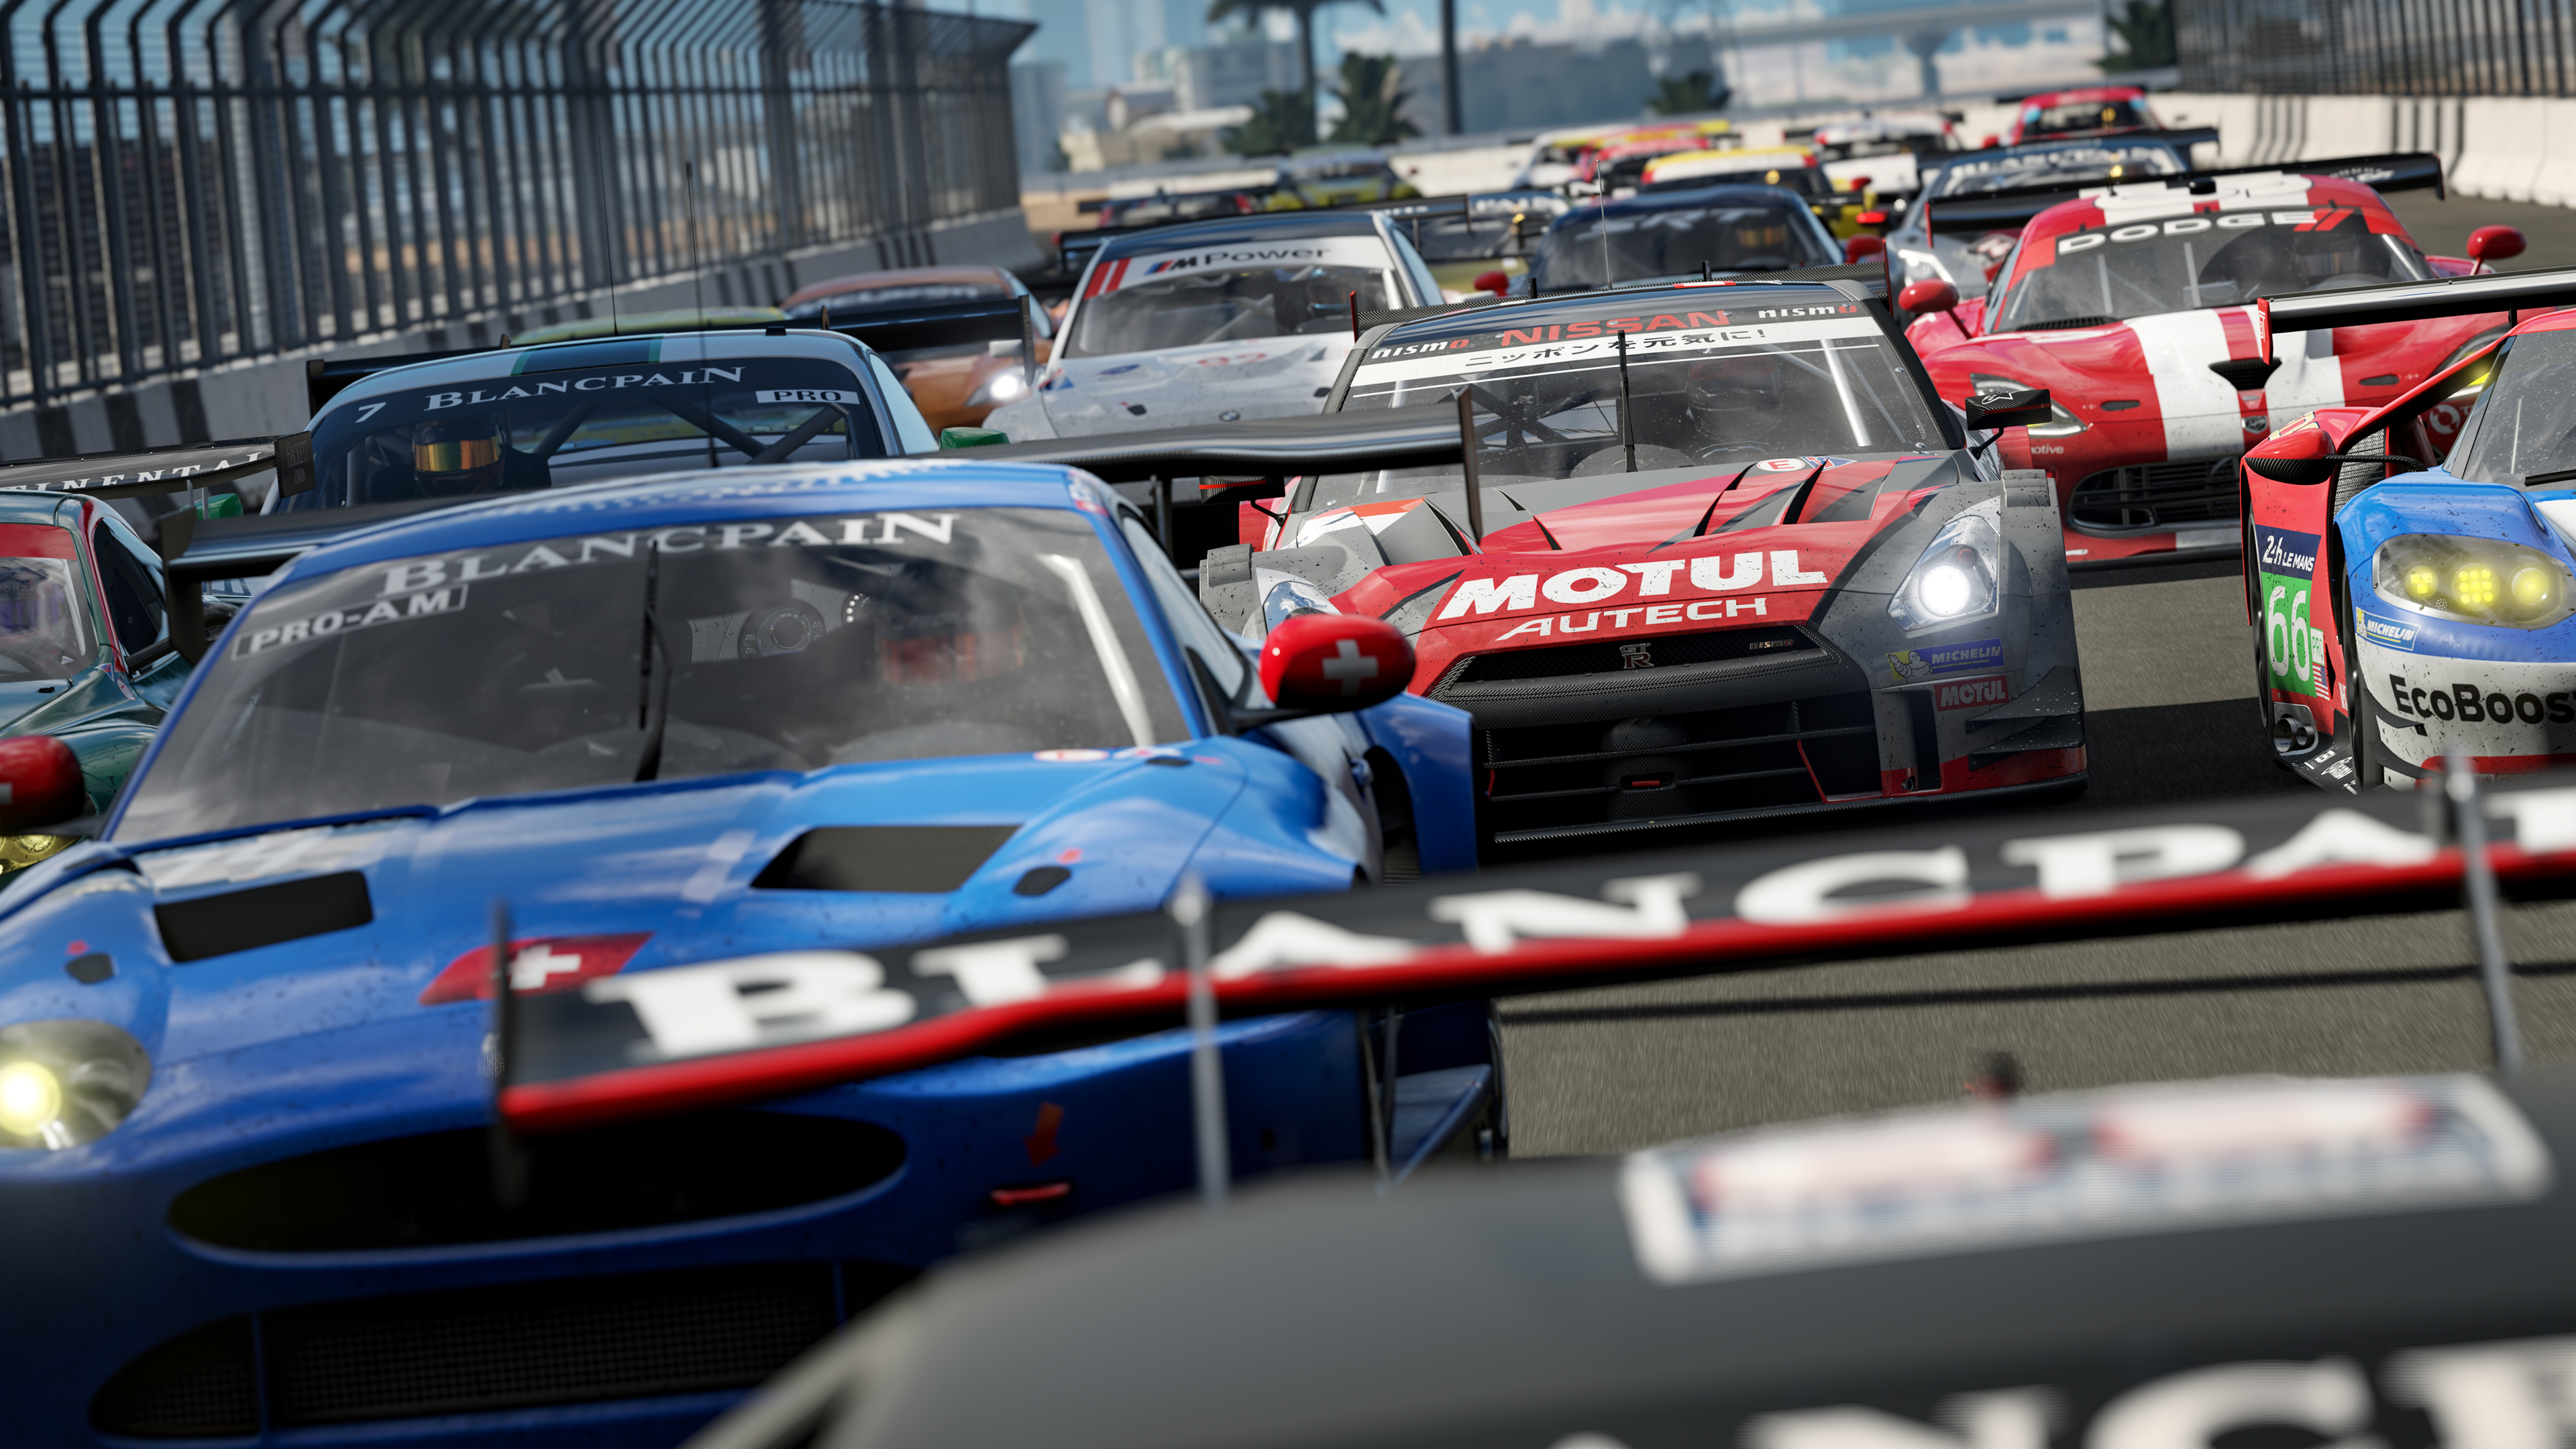 Forza Motorsport 7 PC review